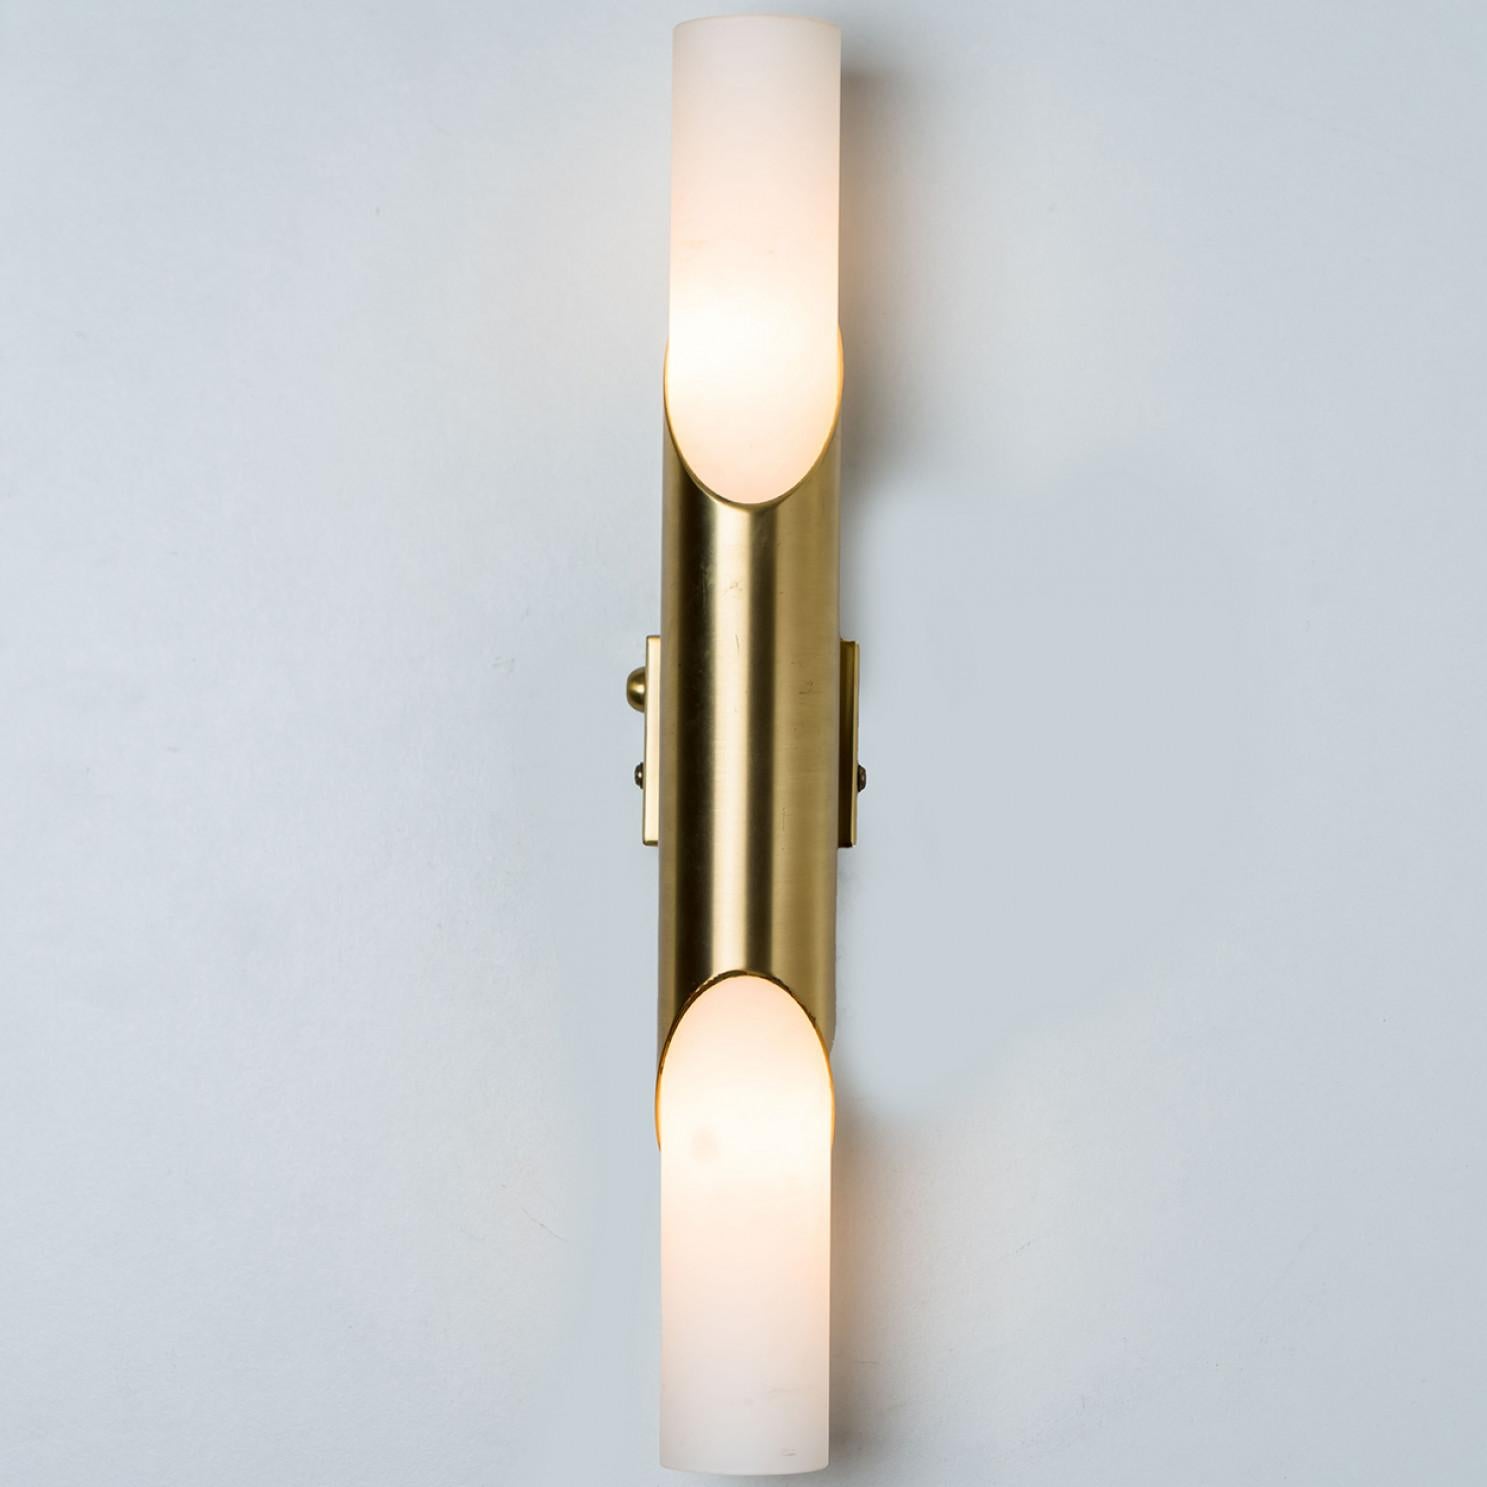 A Pair of Tube Milkglass Brass Wall Sconces, Germany, 1970s For Sale 4